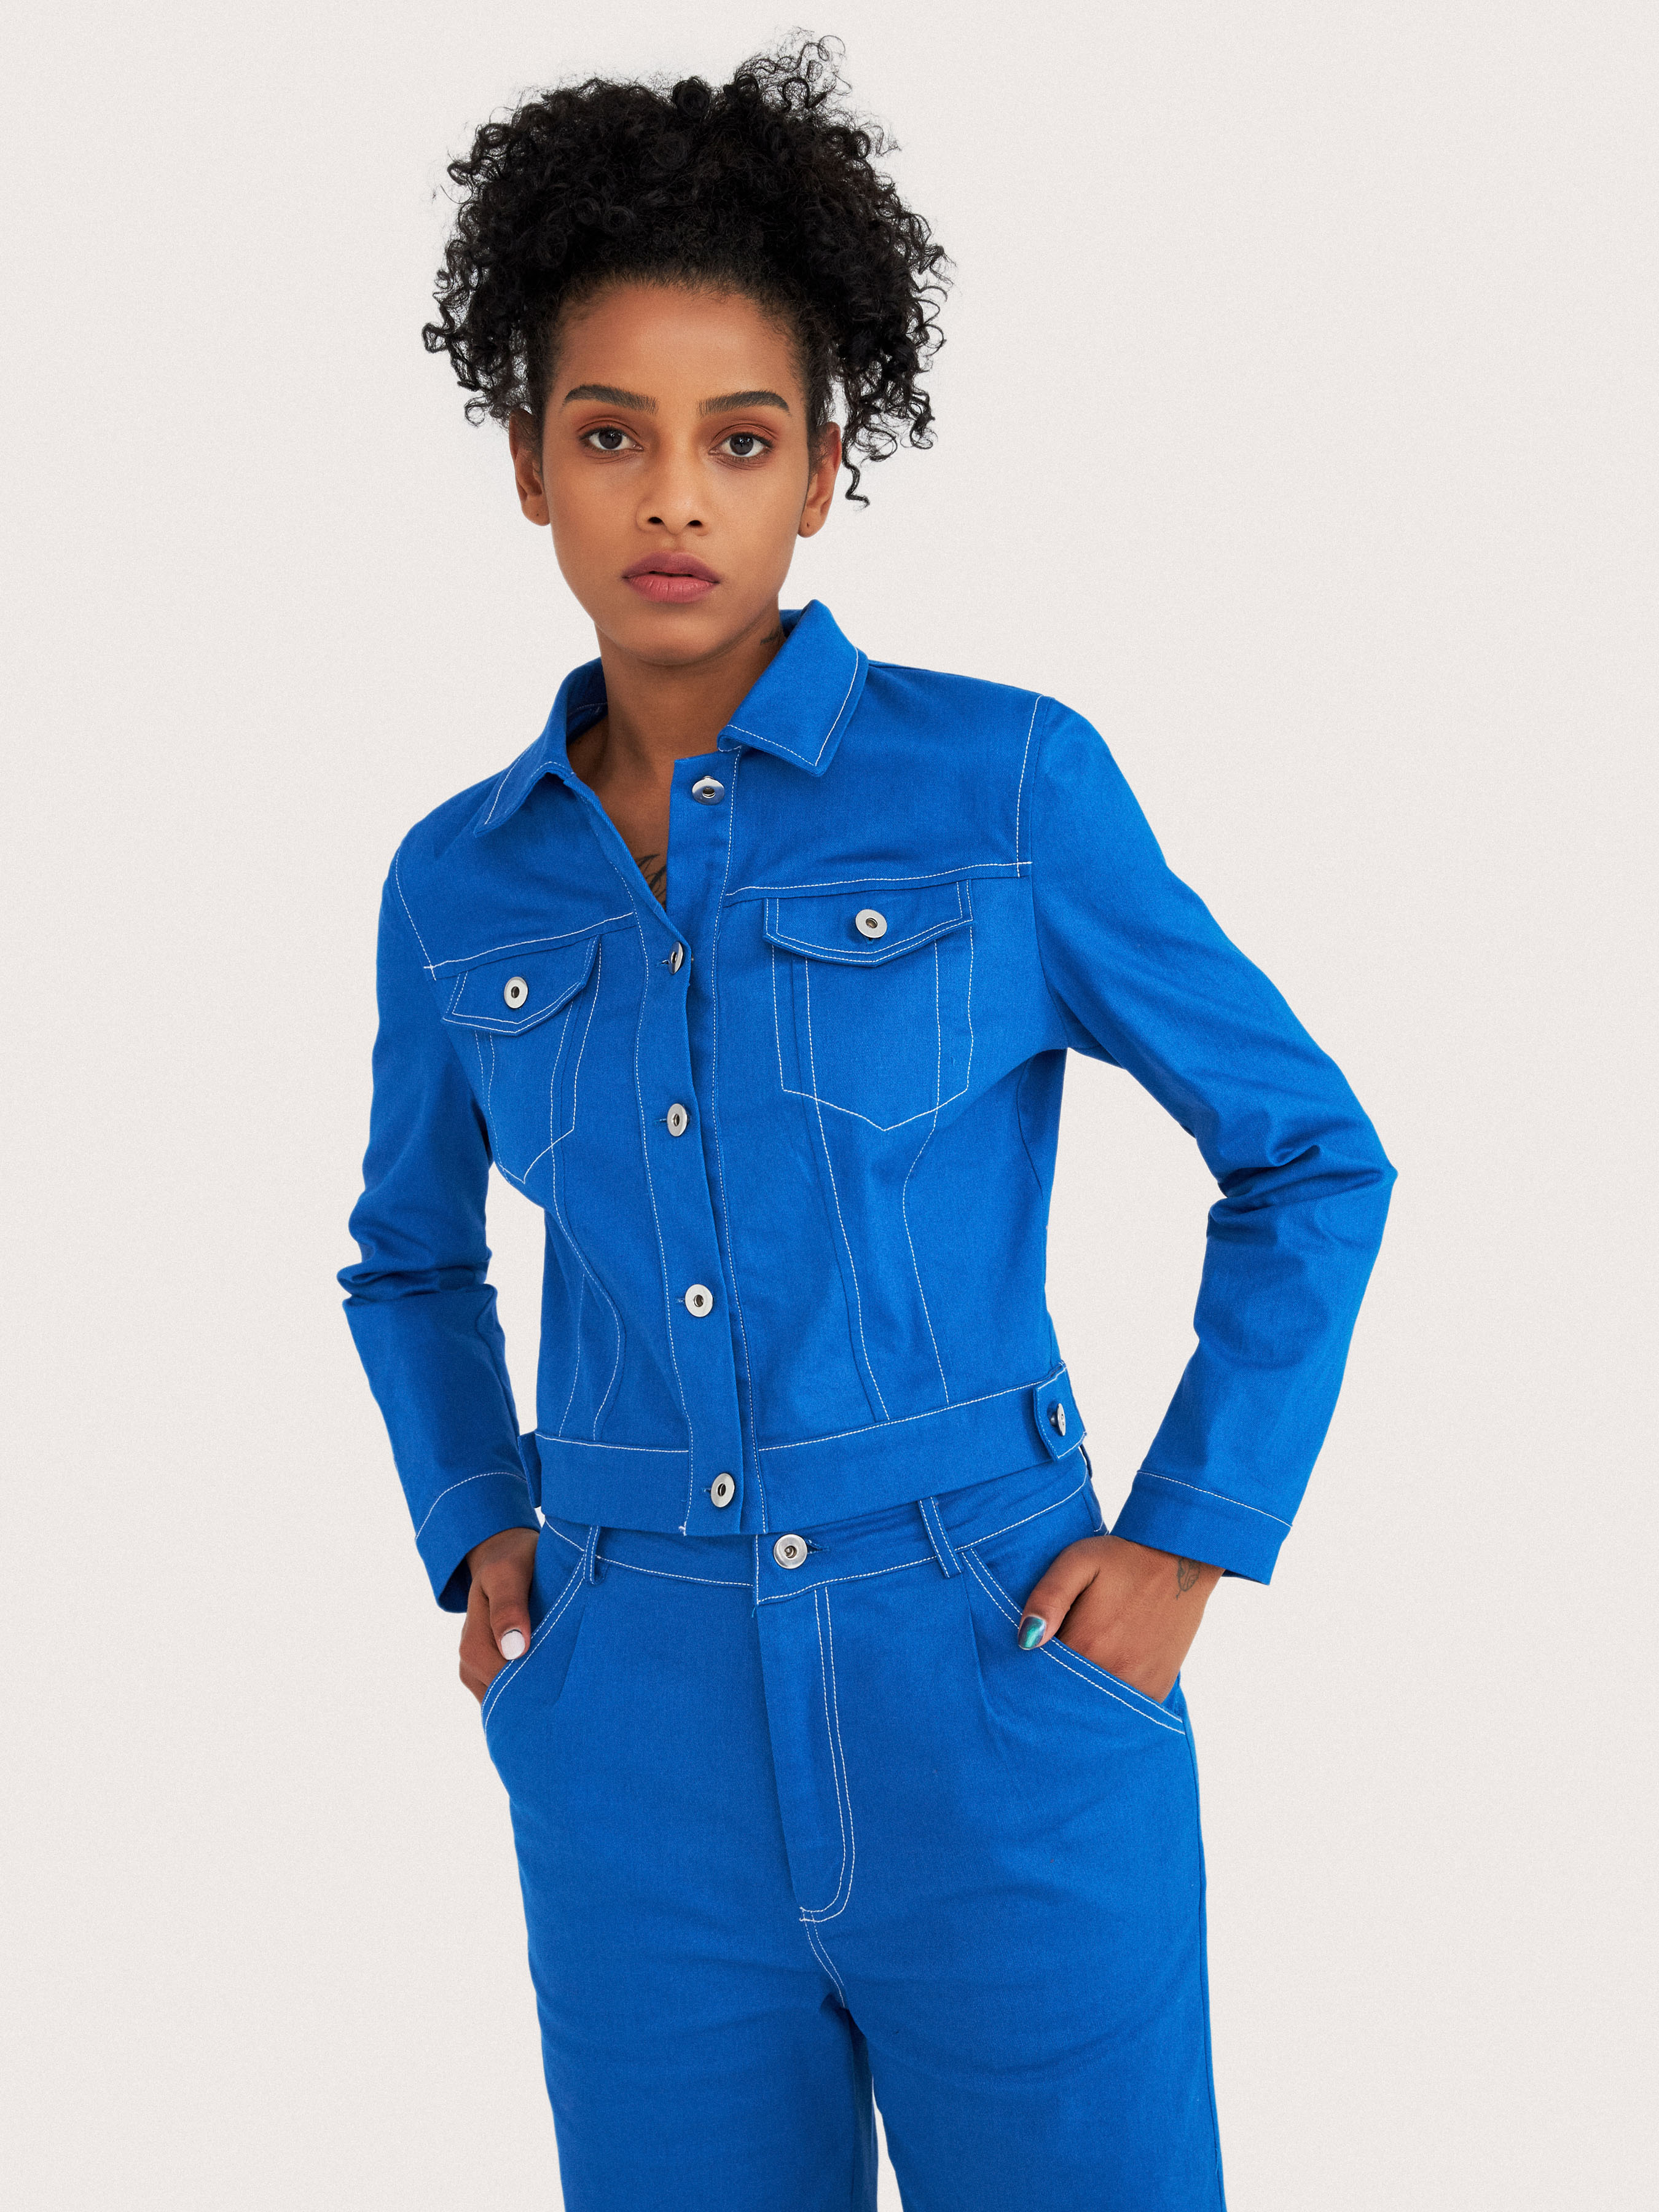 Blue Button Up Jacket For Picnic Outdoor